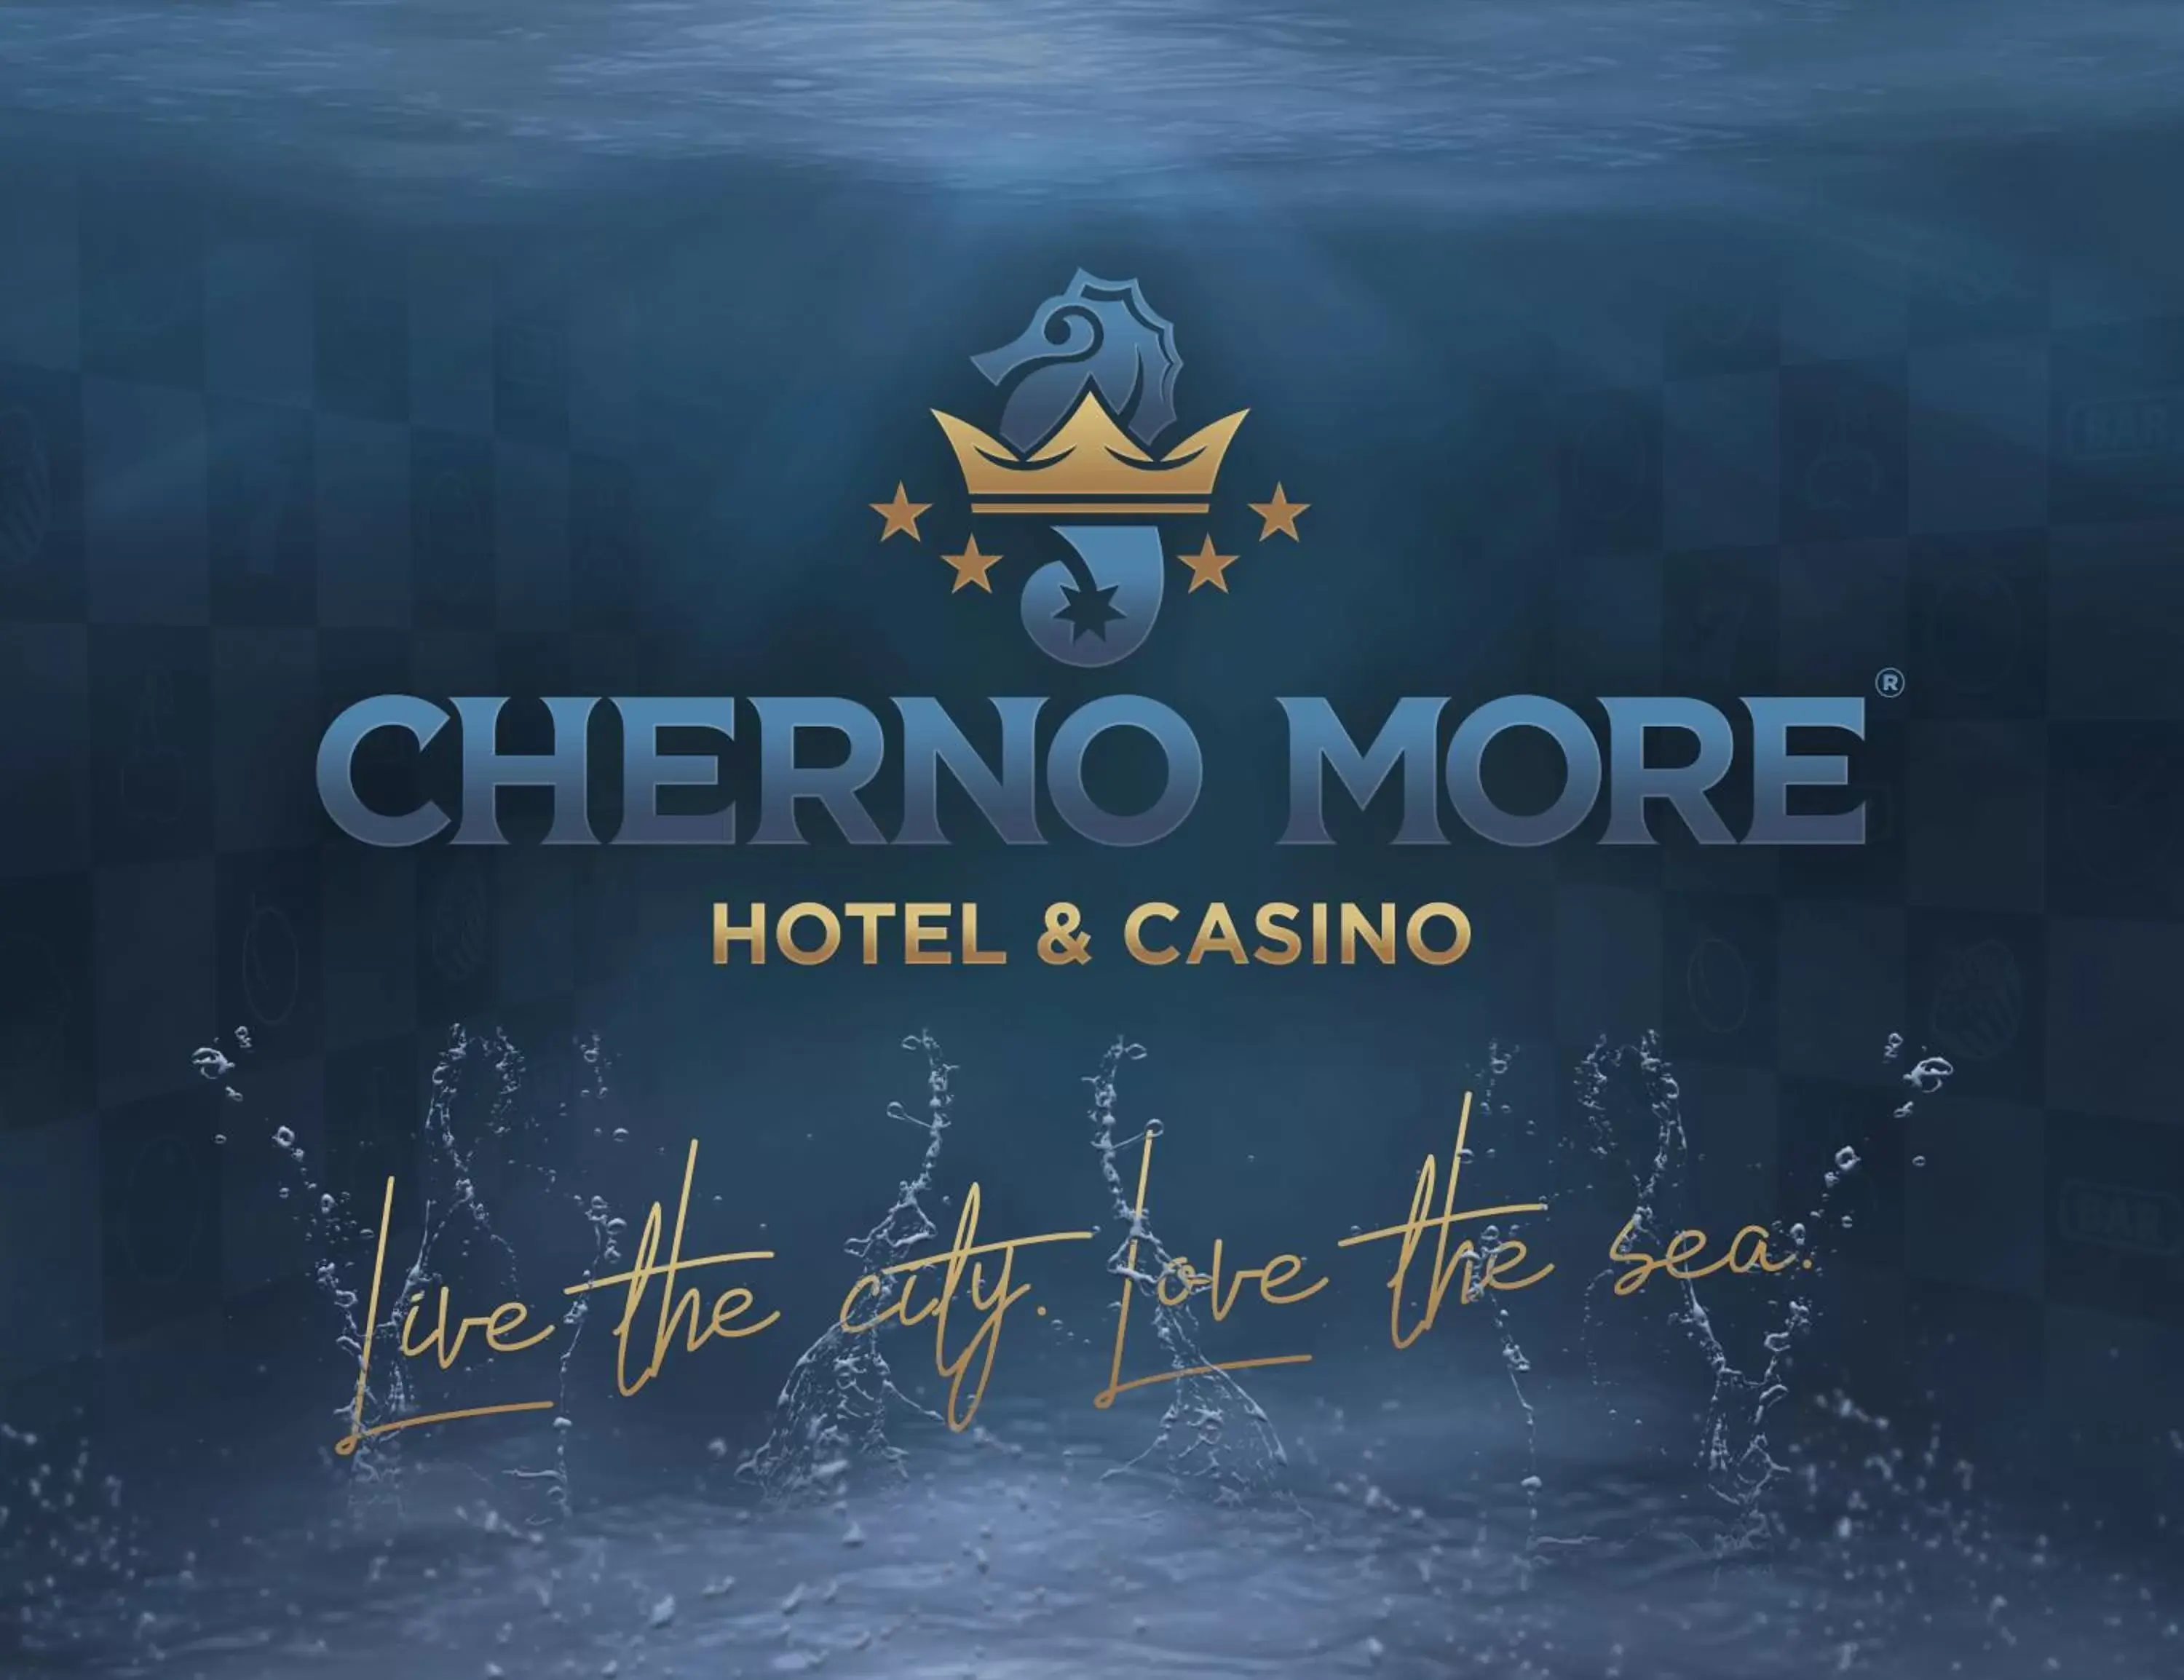 Property logo or sign in Hotel & Casino Cherno More